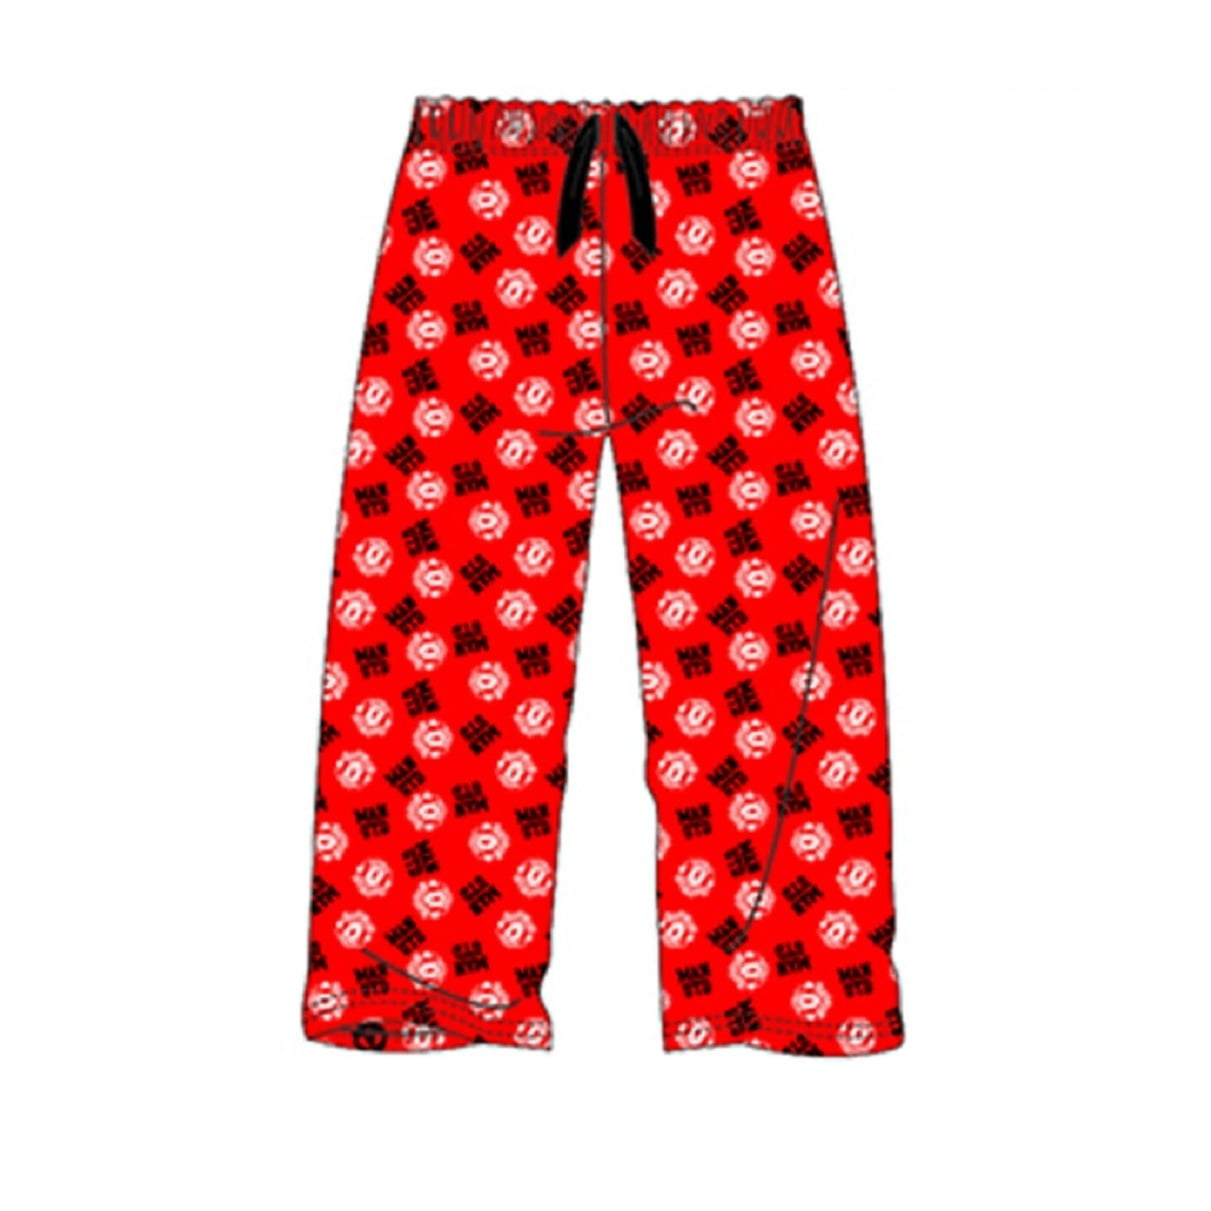 Mufc Official Adults Manchester United Lounge Pants 100% Cotton - Sizes S to XL 